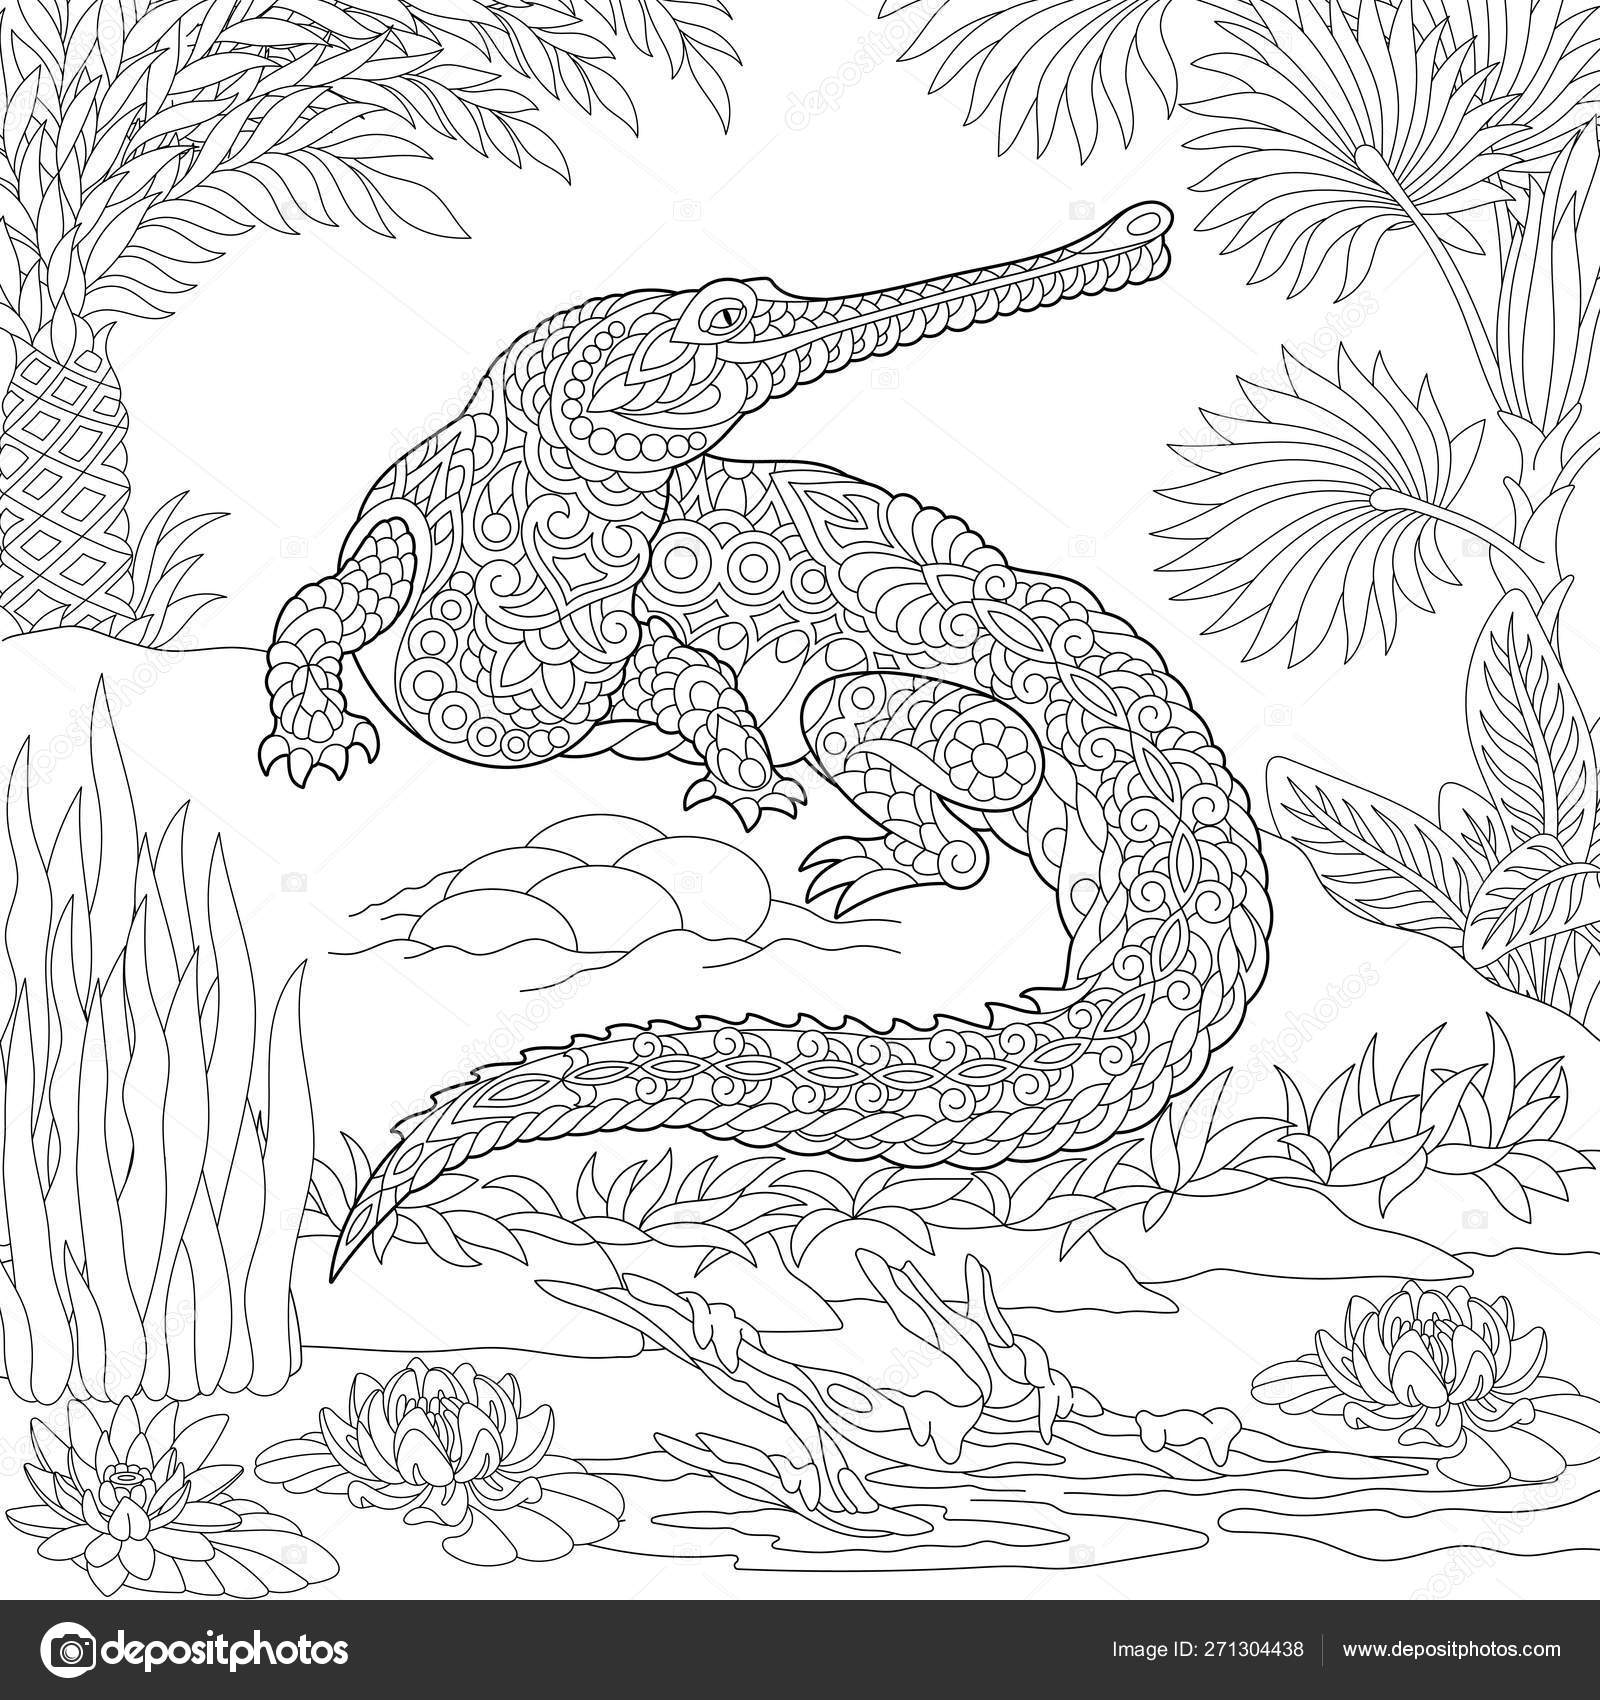 Zentangle gharial crocodile coloring page stock vector by sybirko